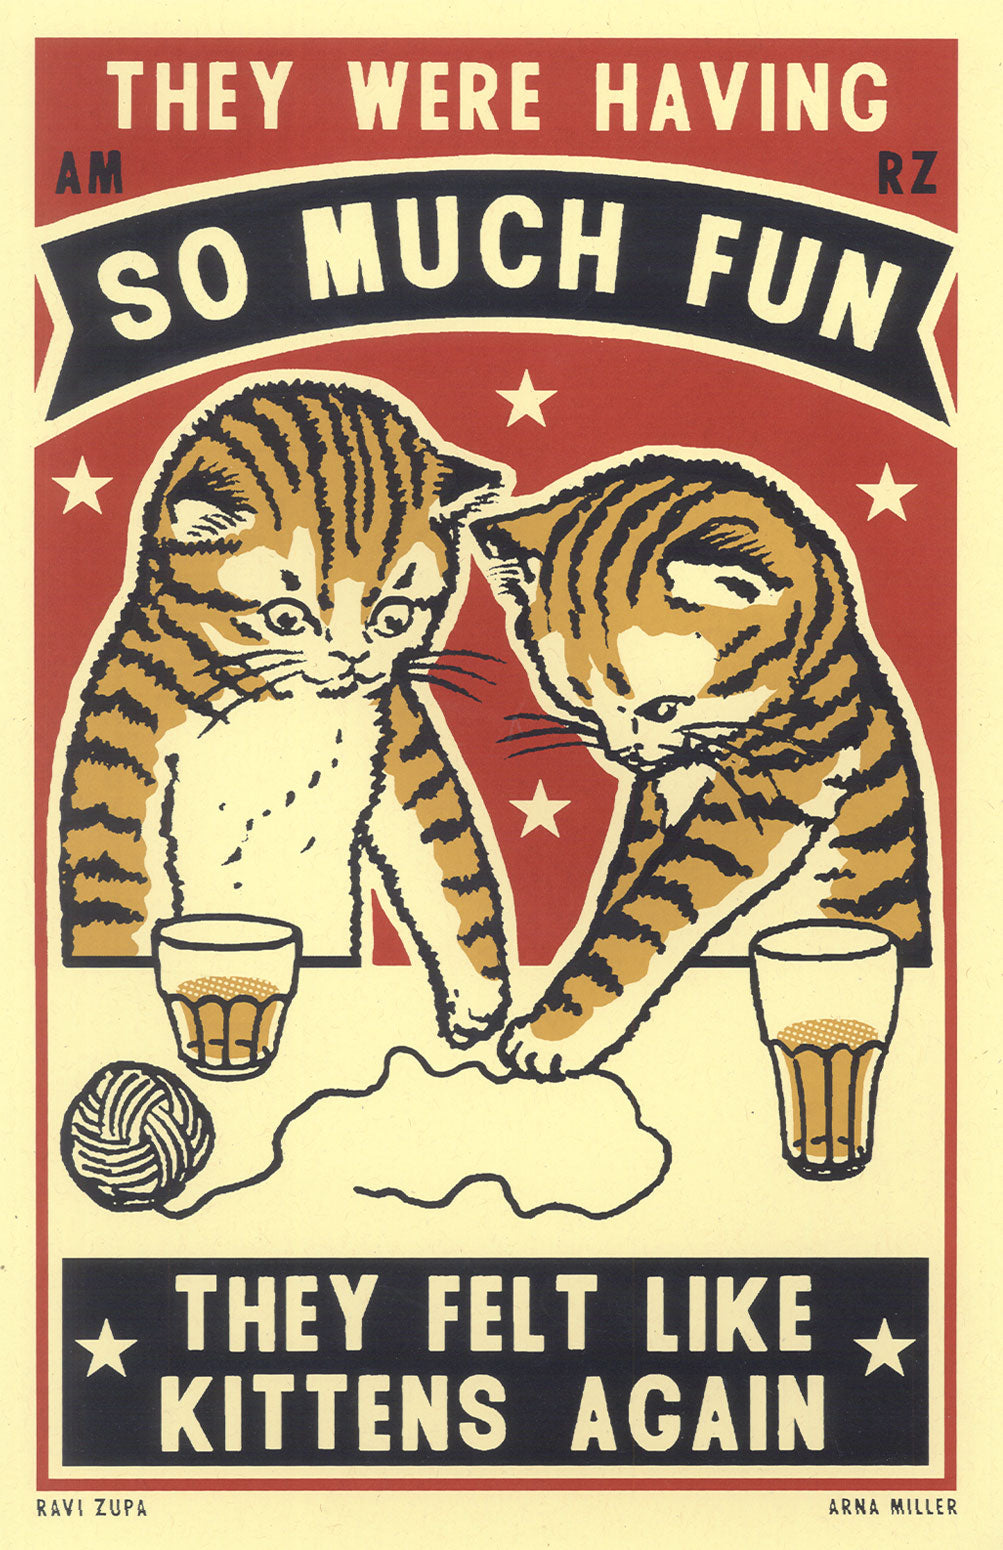 Drunk Cat Series Print - They Were Having So Much Fun, They Felt Like Kittens Again - By Arna Miller and Ravi Zupa